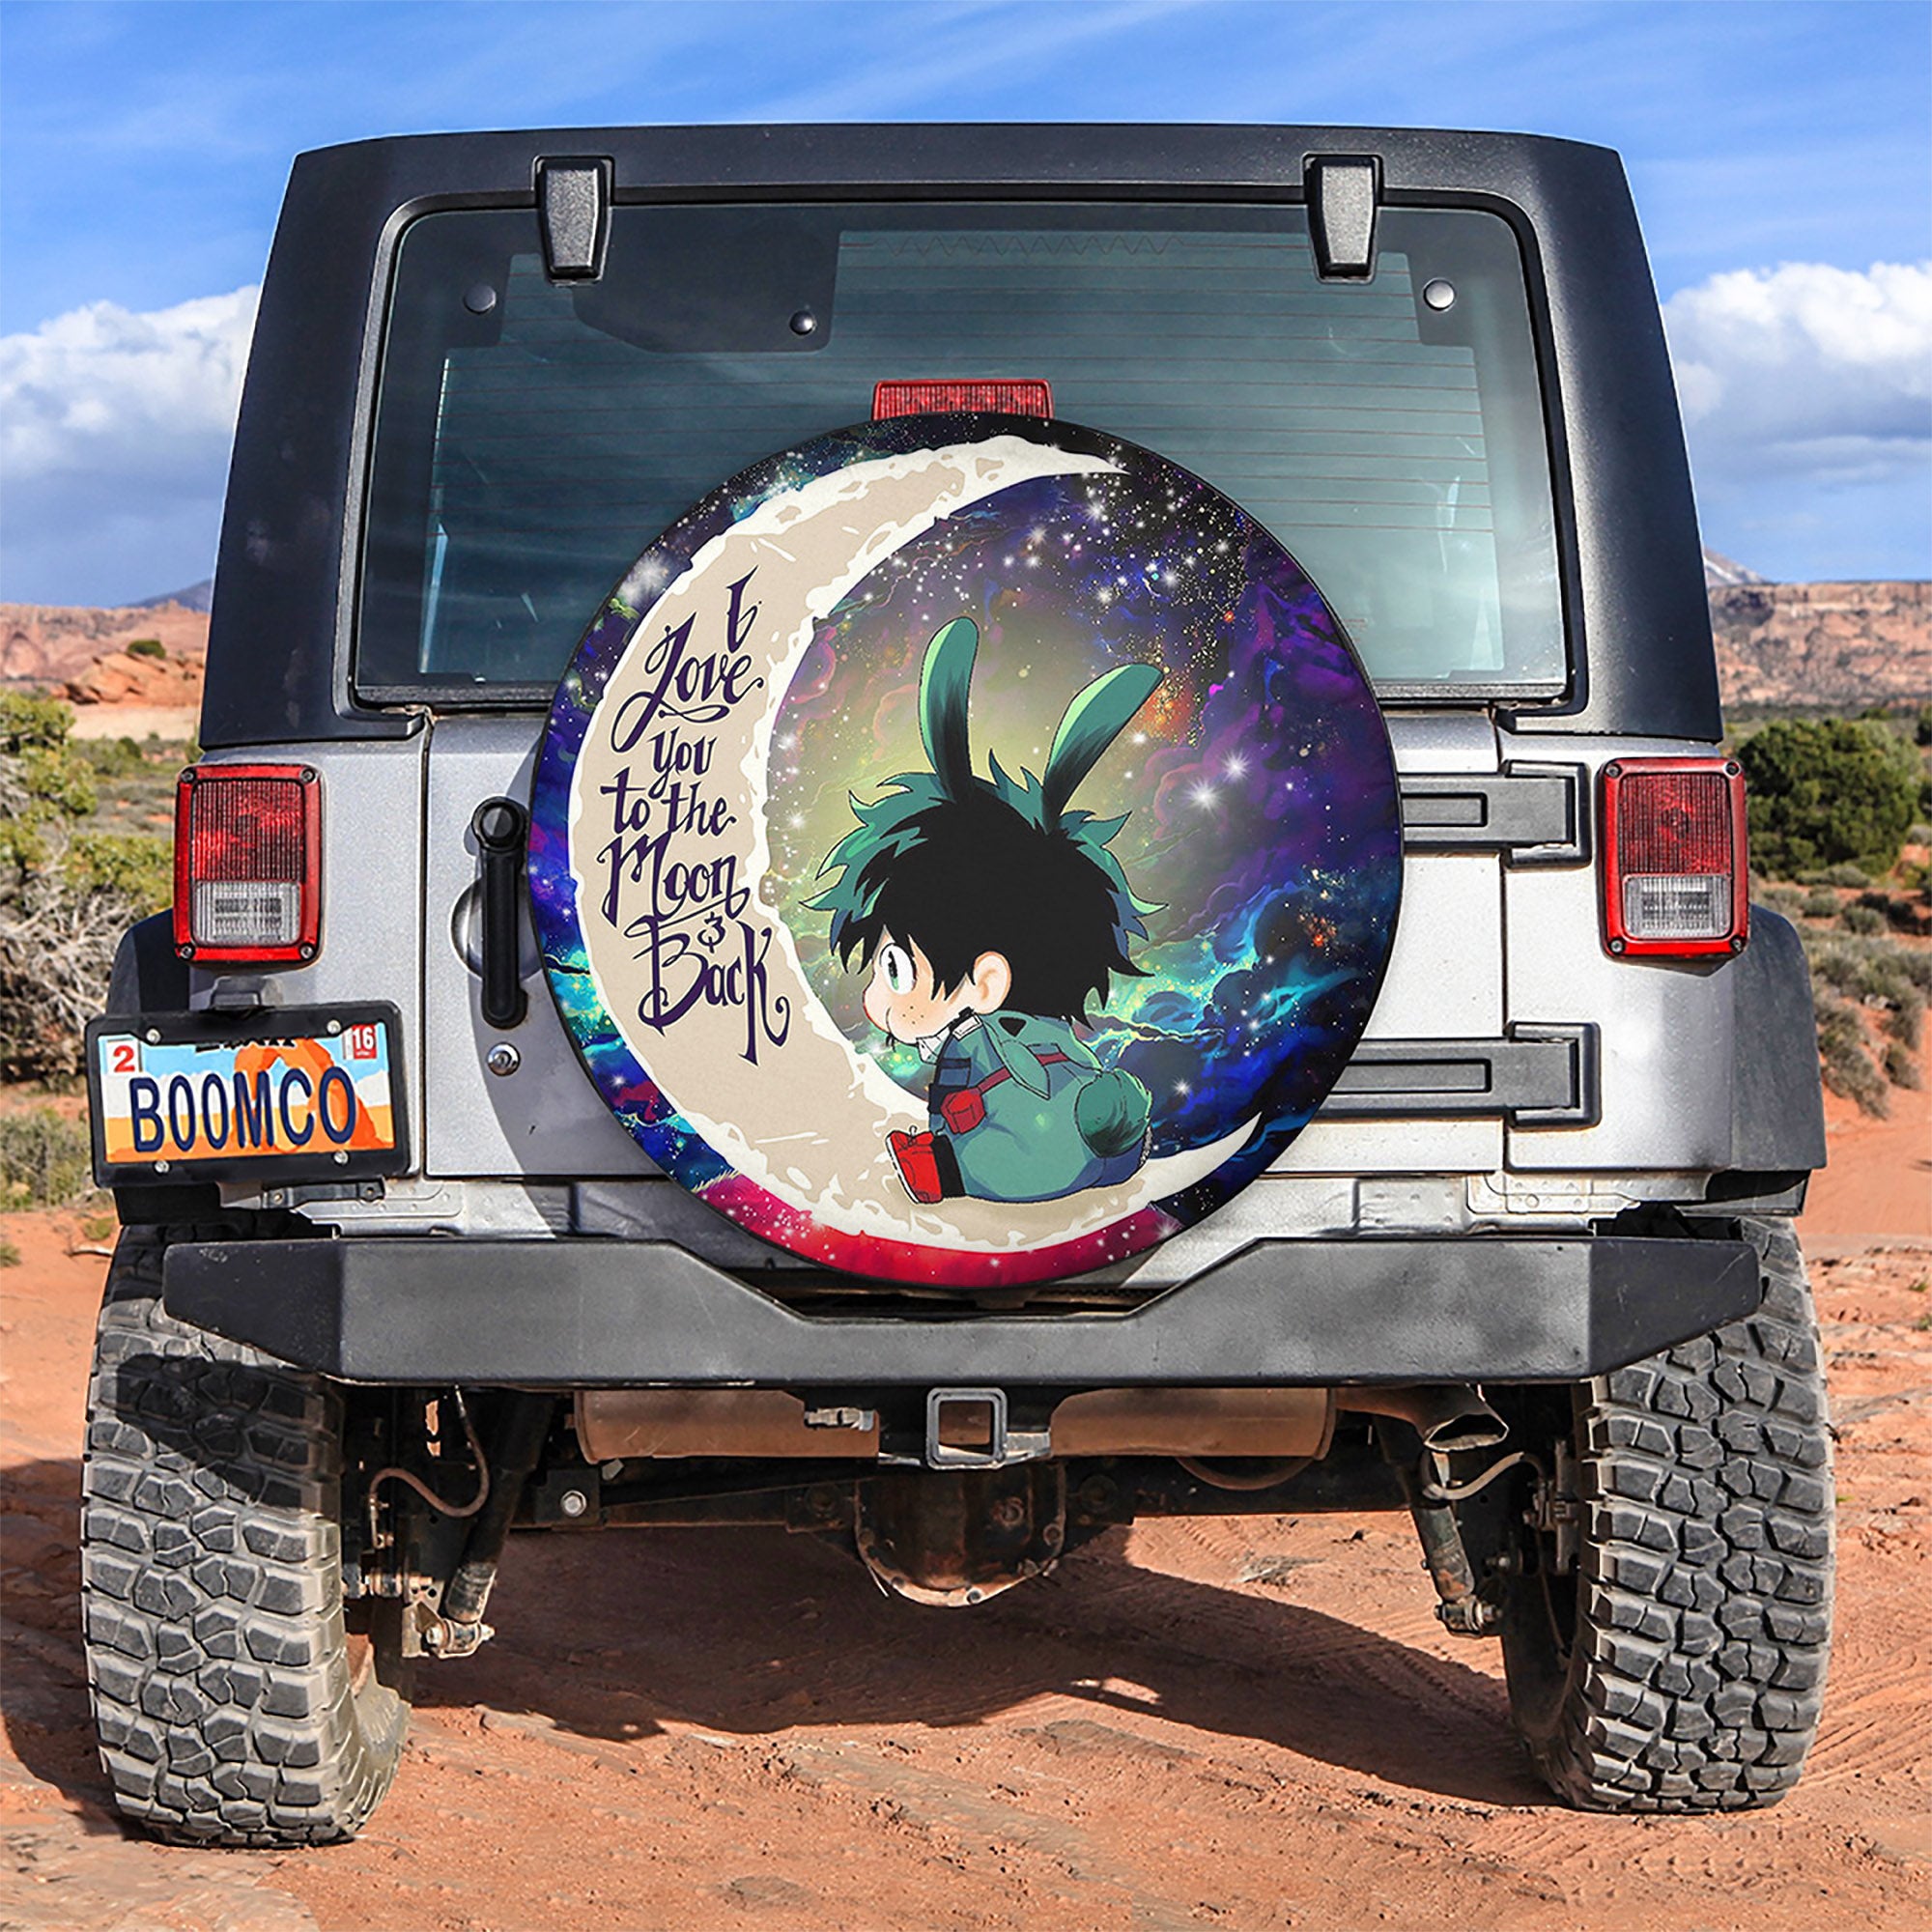 Deku My Hero Academia Anime Love You To The Moon Galaxy Spare Tire Covers Gift For Campers Nearkii